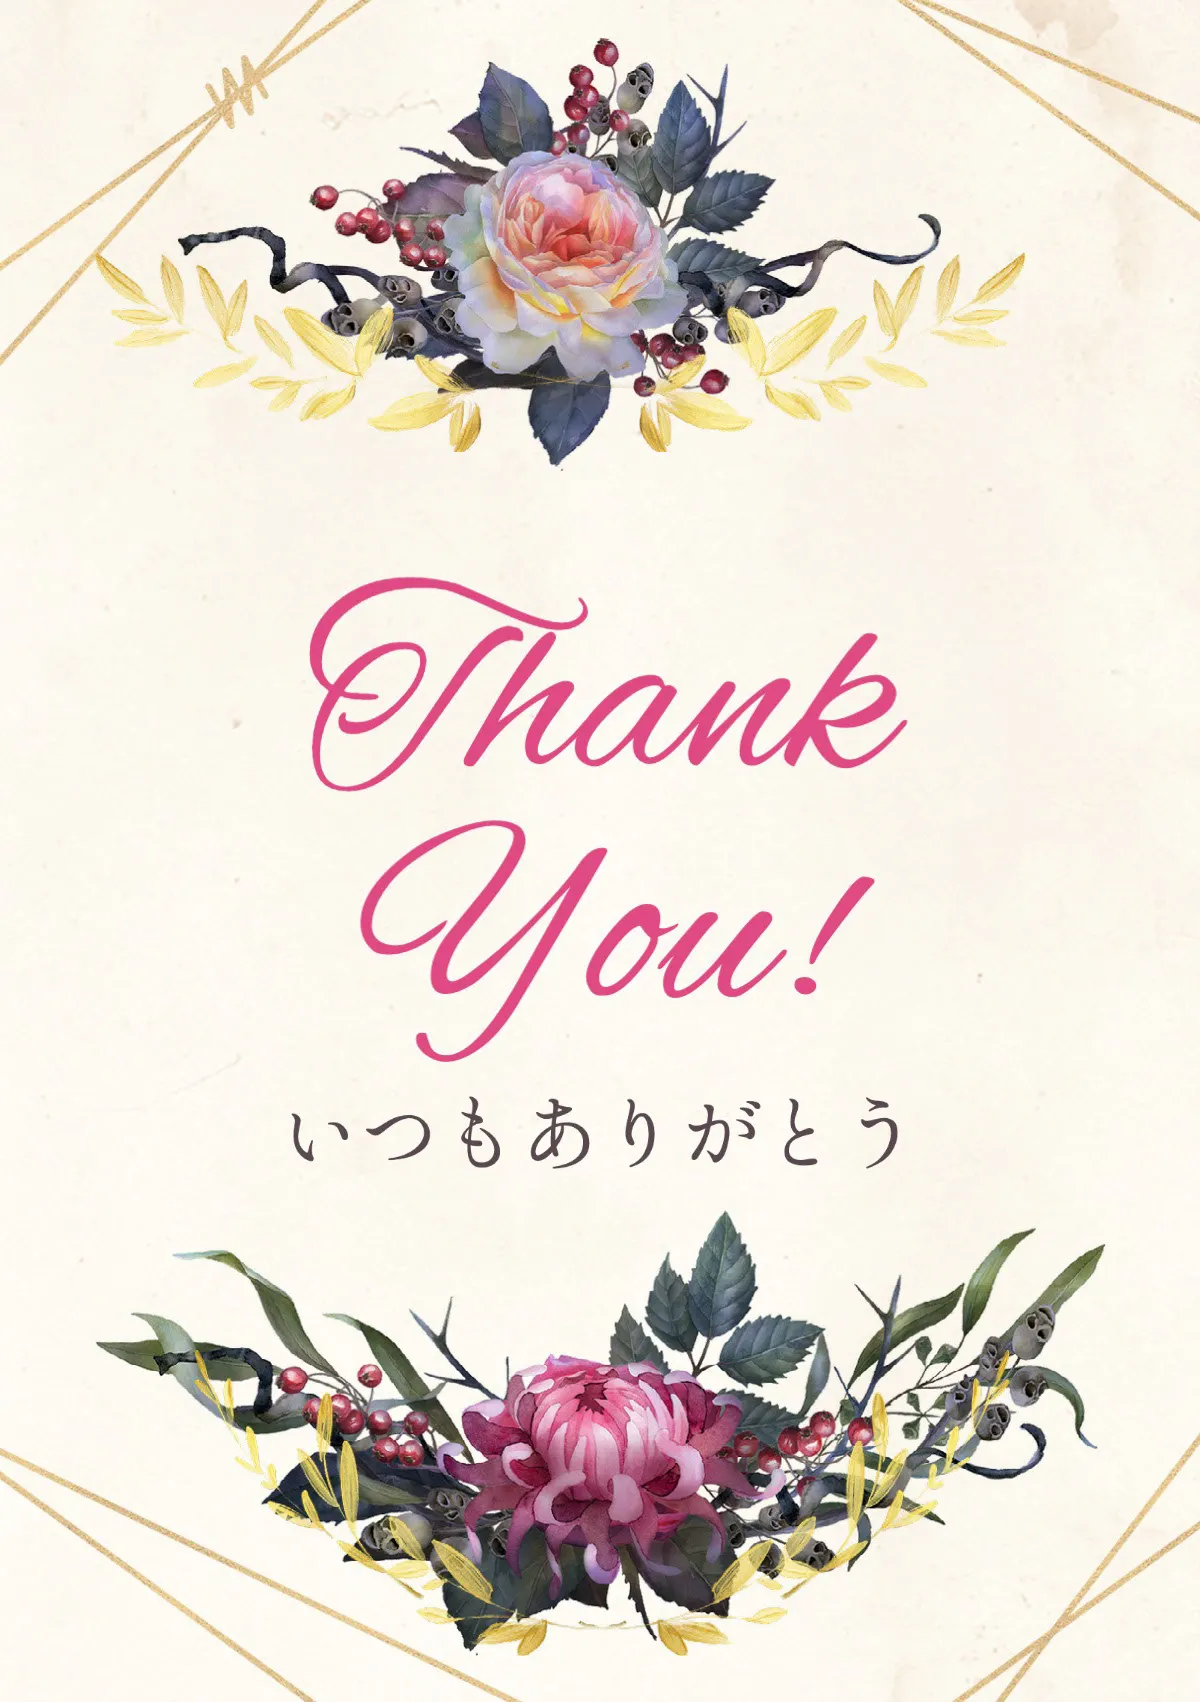 Thanks card with flower illustrations